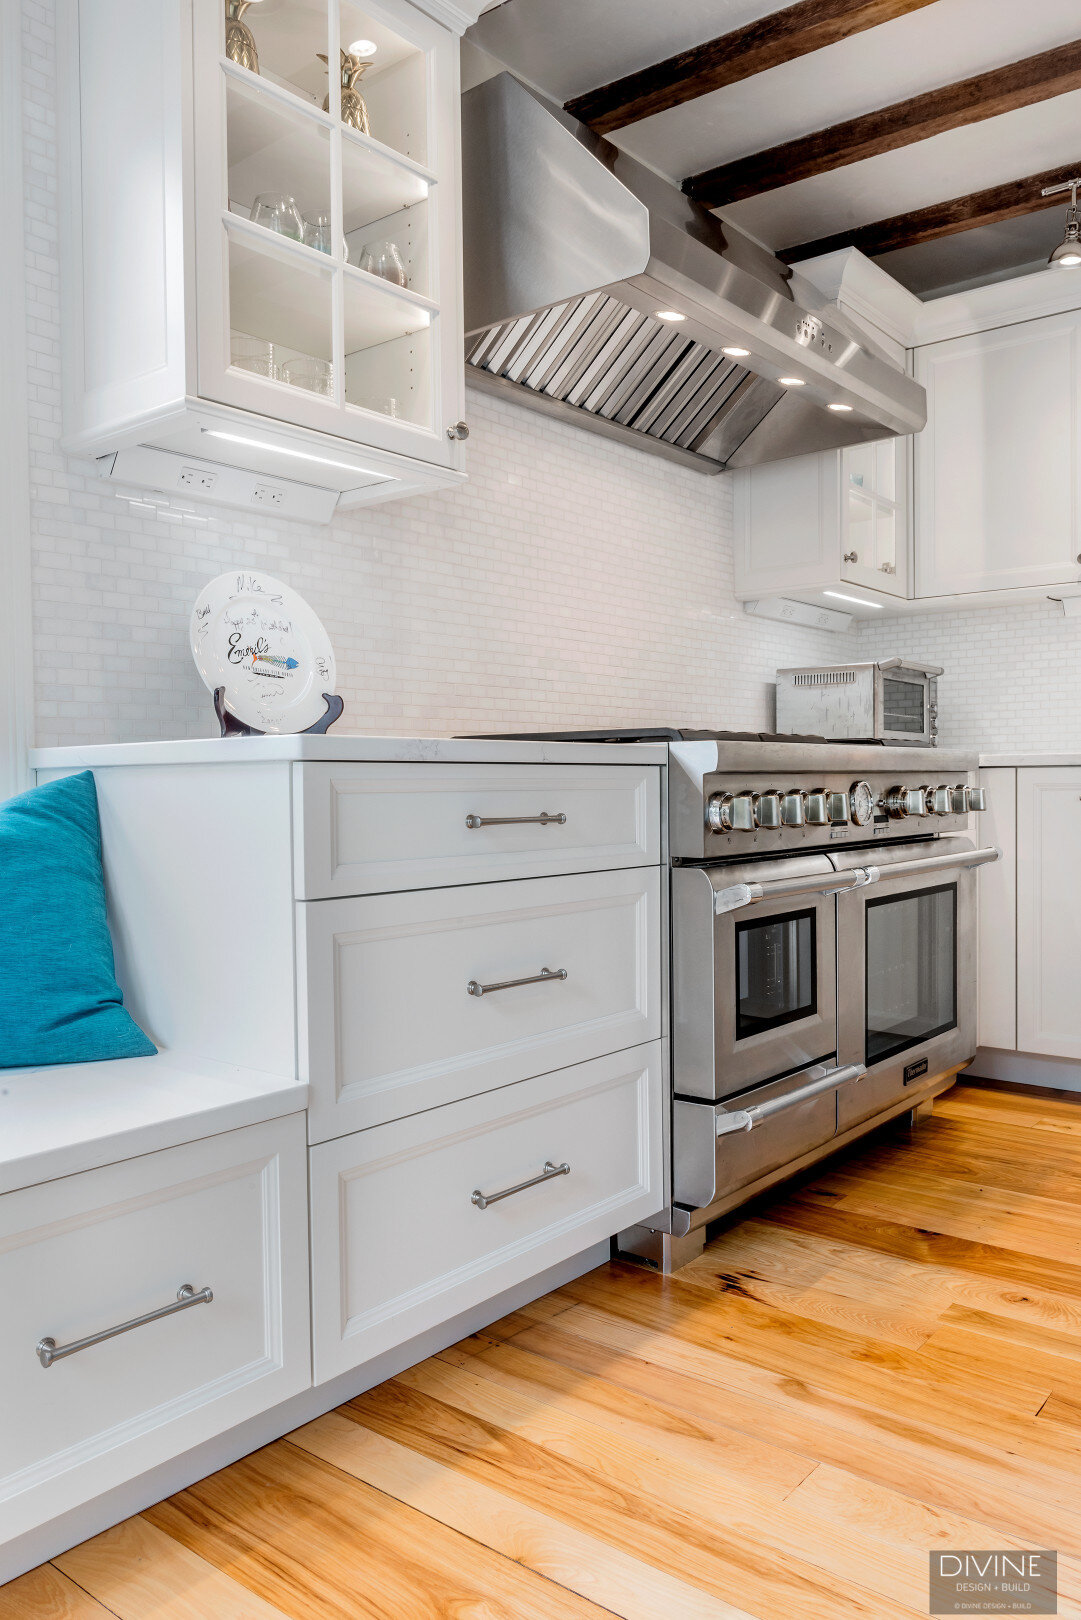 white, shaker style cabinets with brushed nickel accessories, white mosaic subway tile backsplash, cambria countertops with light marbling in grey tone and thermador appliances